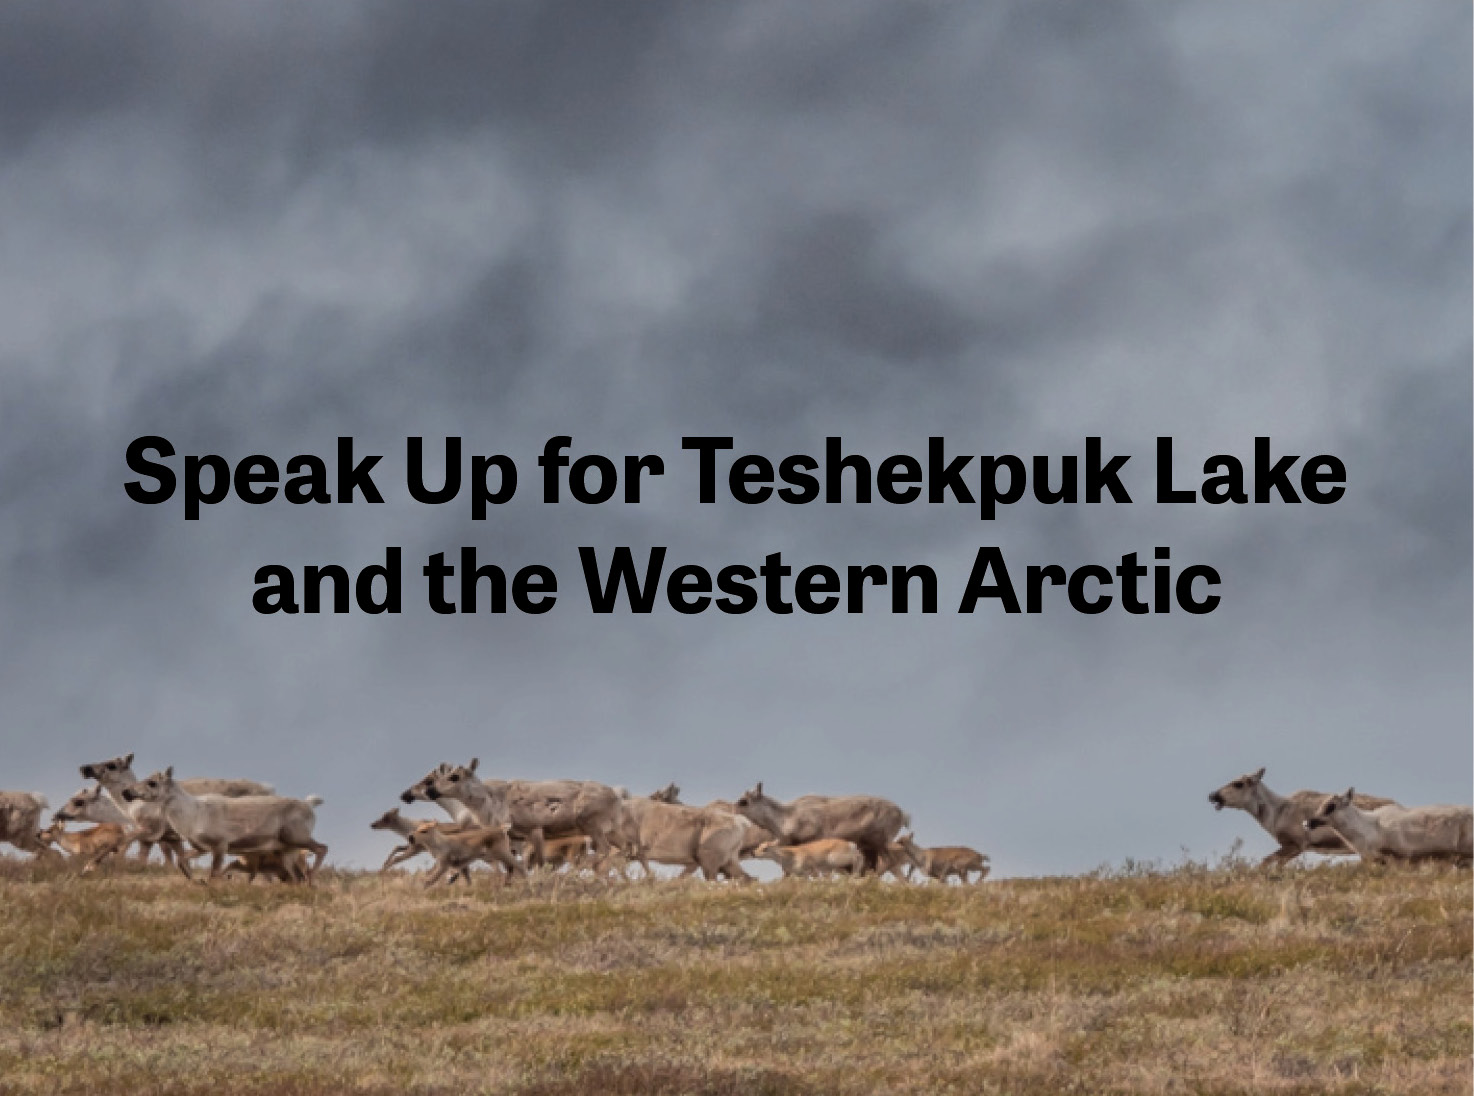 Caribou in the Teshekpuk Lake area of the NPRA or Western Arctic. Text says to speak up for the people and animals by telling BLM to expand protections in the NPRA 